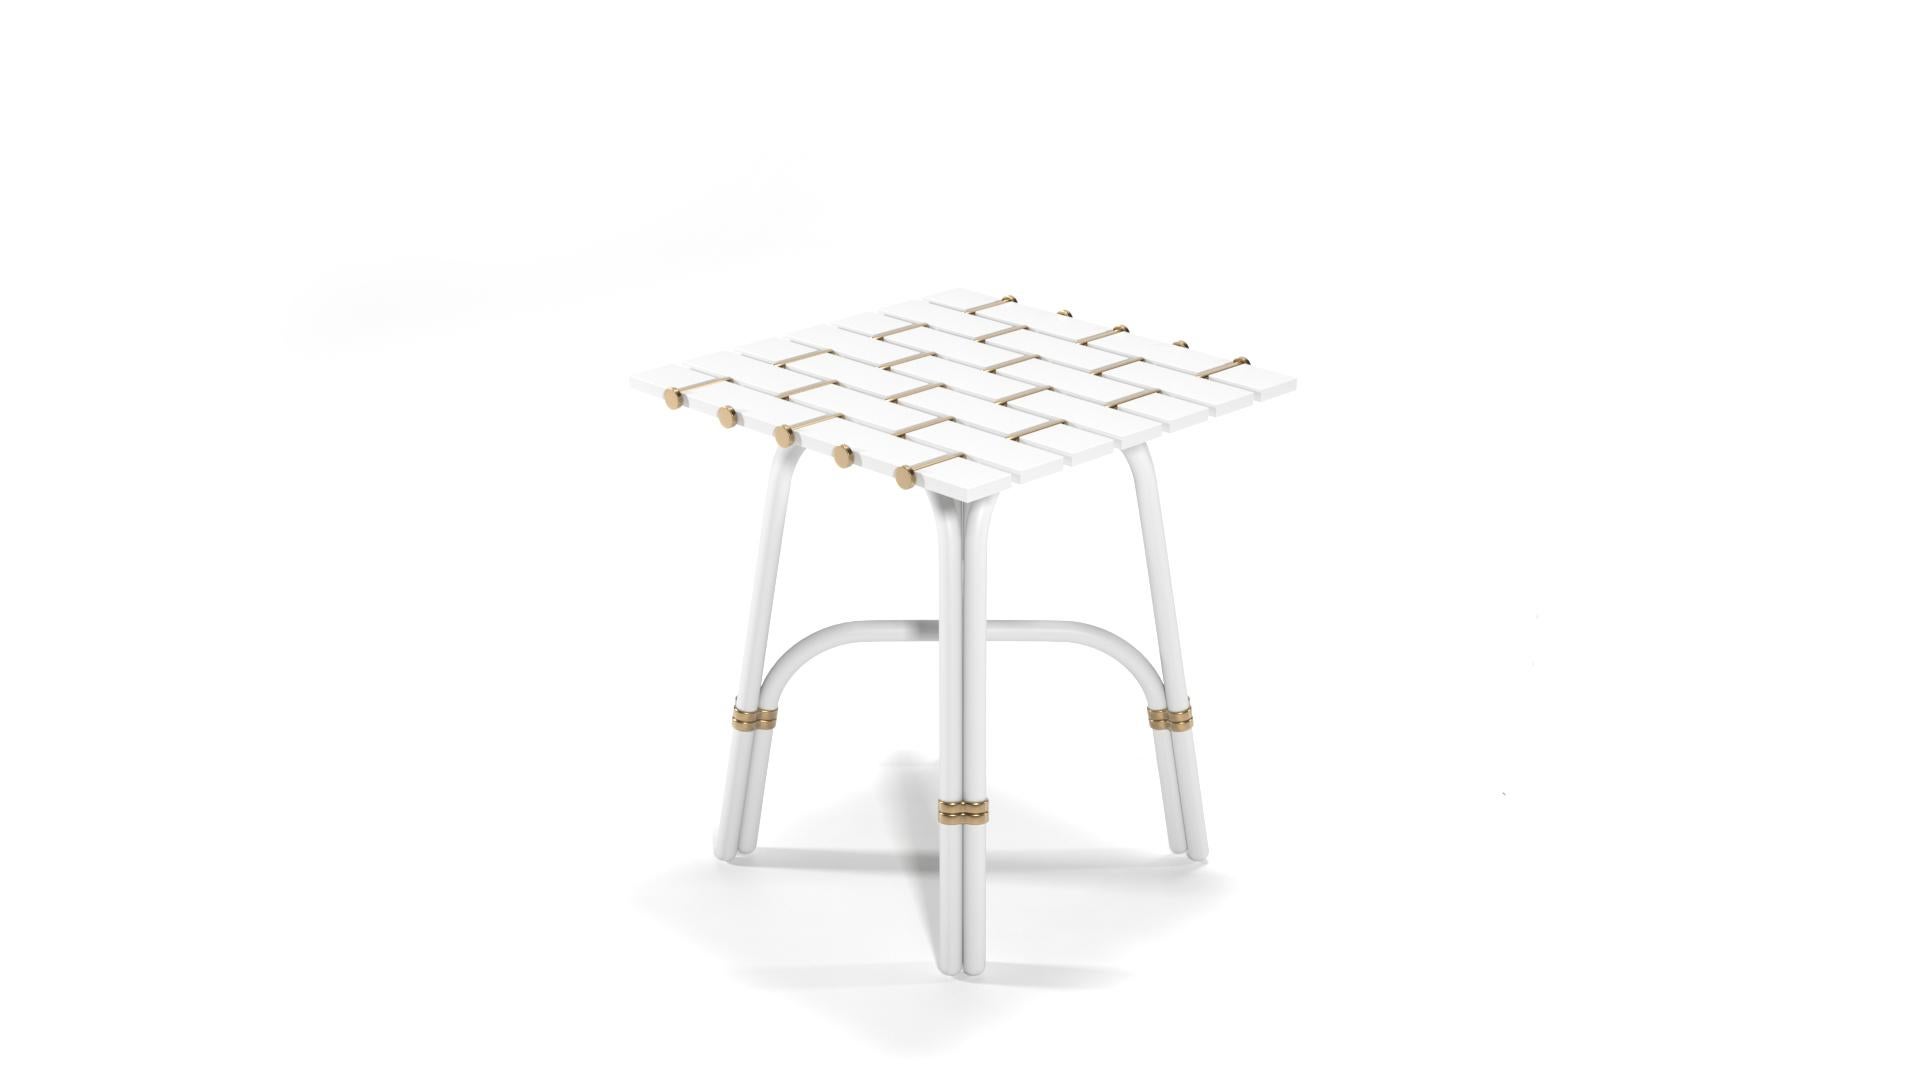 The Gubuk collection transmits the serenity of the sea and the beauty of nature, reminding us that the best things in life are happiness and well-being.

The whole design of this comtemporary outdoor side table was developed according to the